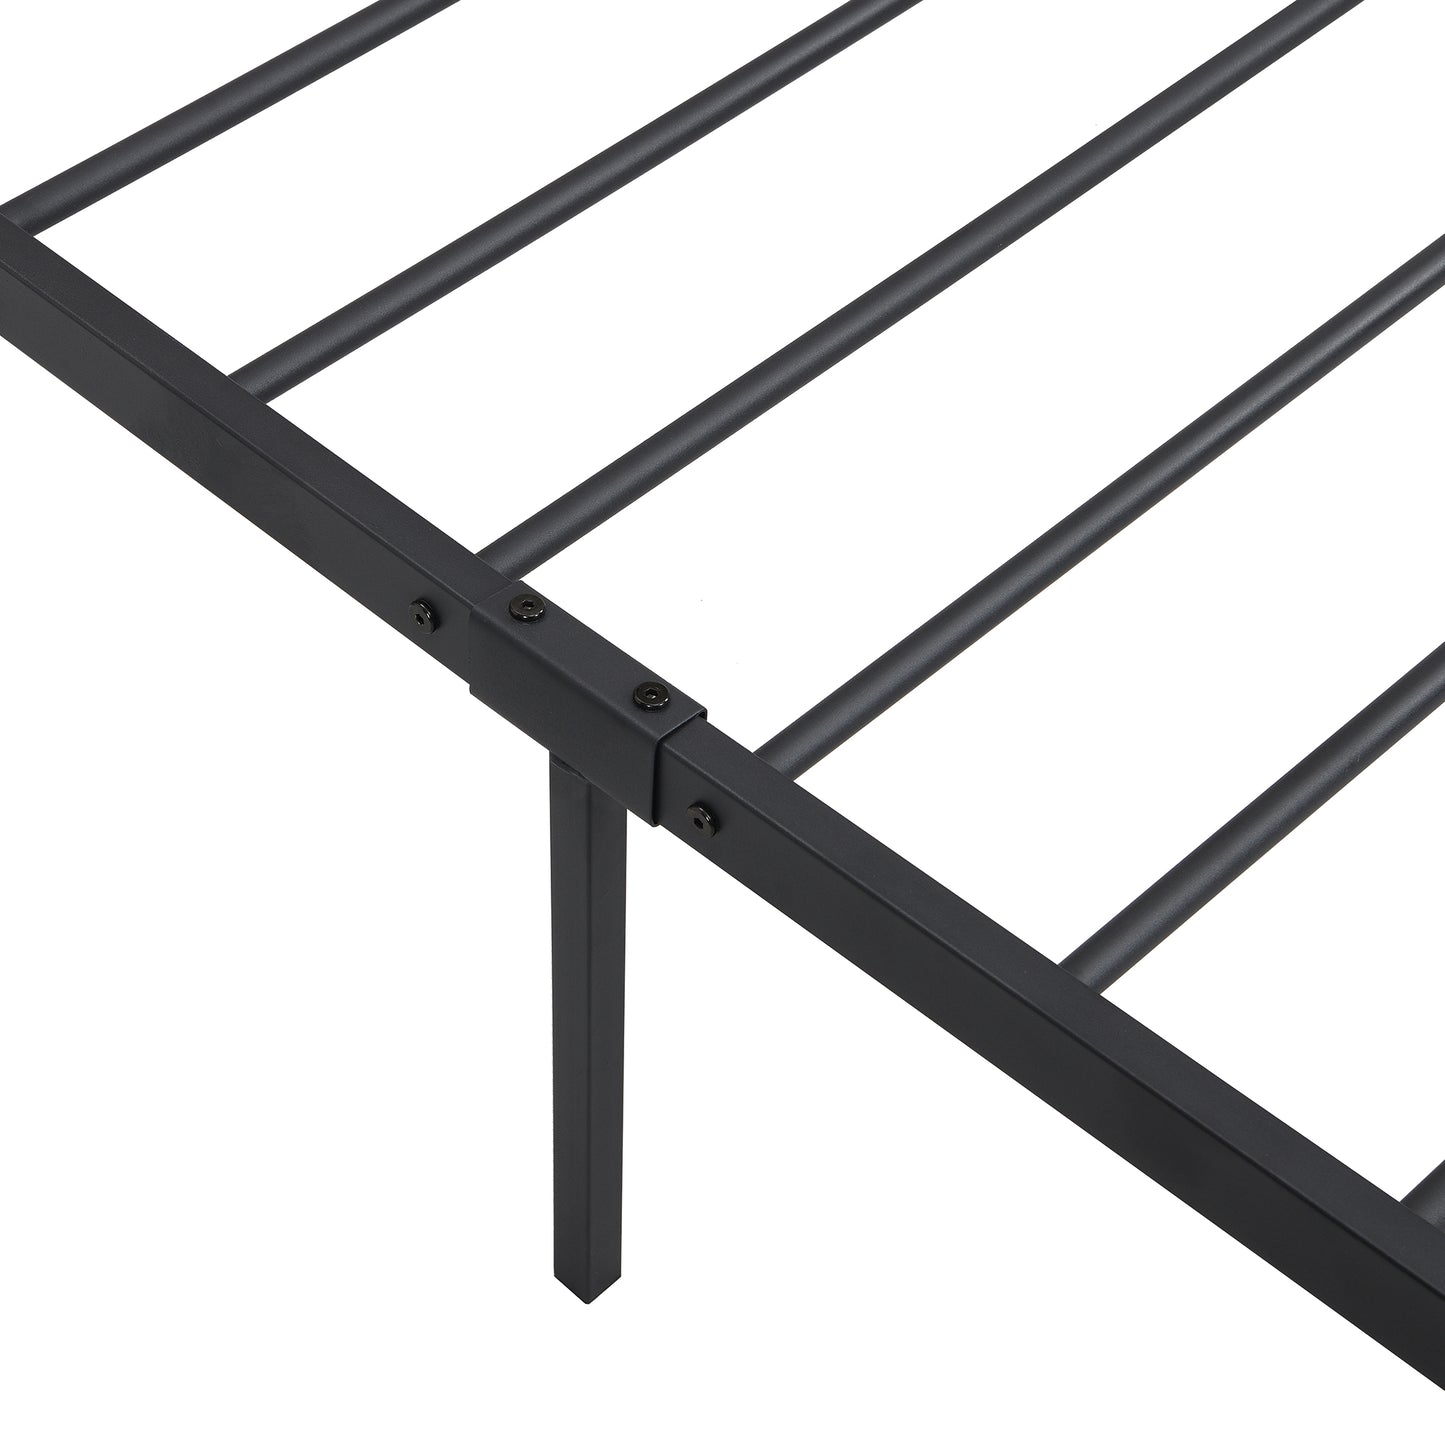 SYNGAR Full Size Metal Platform Bed Frame with Industrial Headboard, Steel Legs, Underbed Storage, Bedroom Furnitrue with Strong Slat Support, No Box Spring Needed, Black